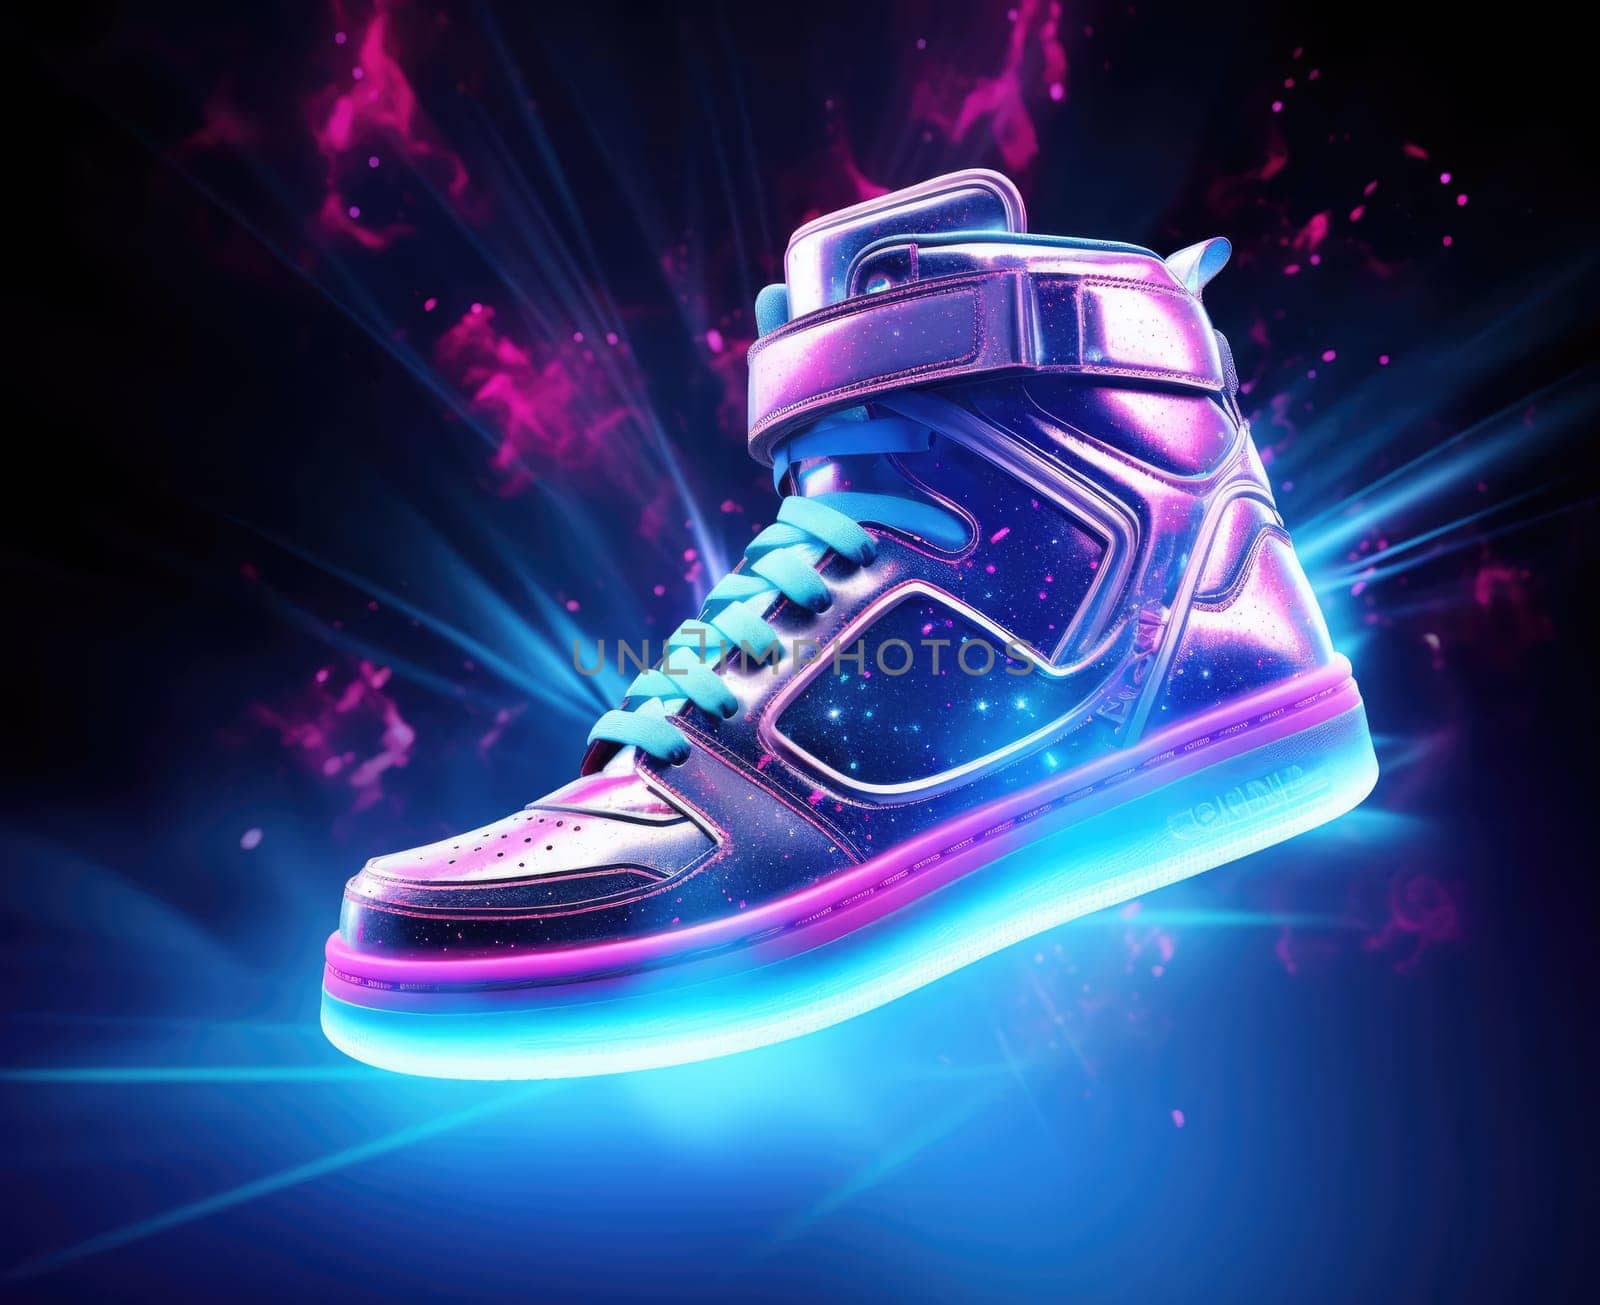 Sneakers with glowing cyberpunk elements by cherezoff